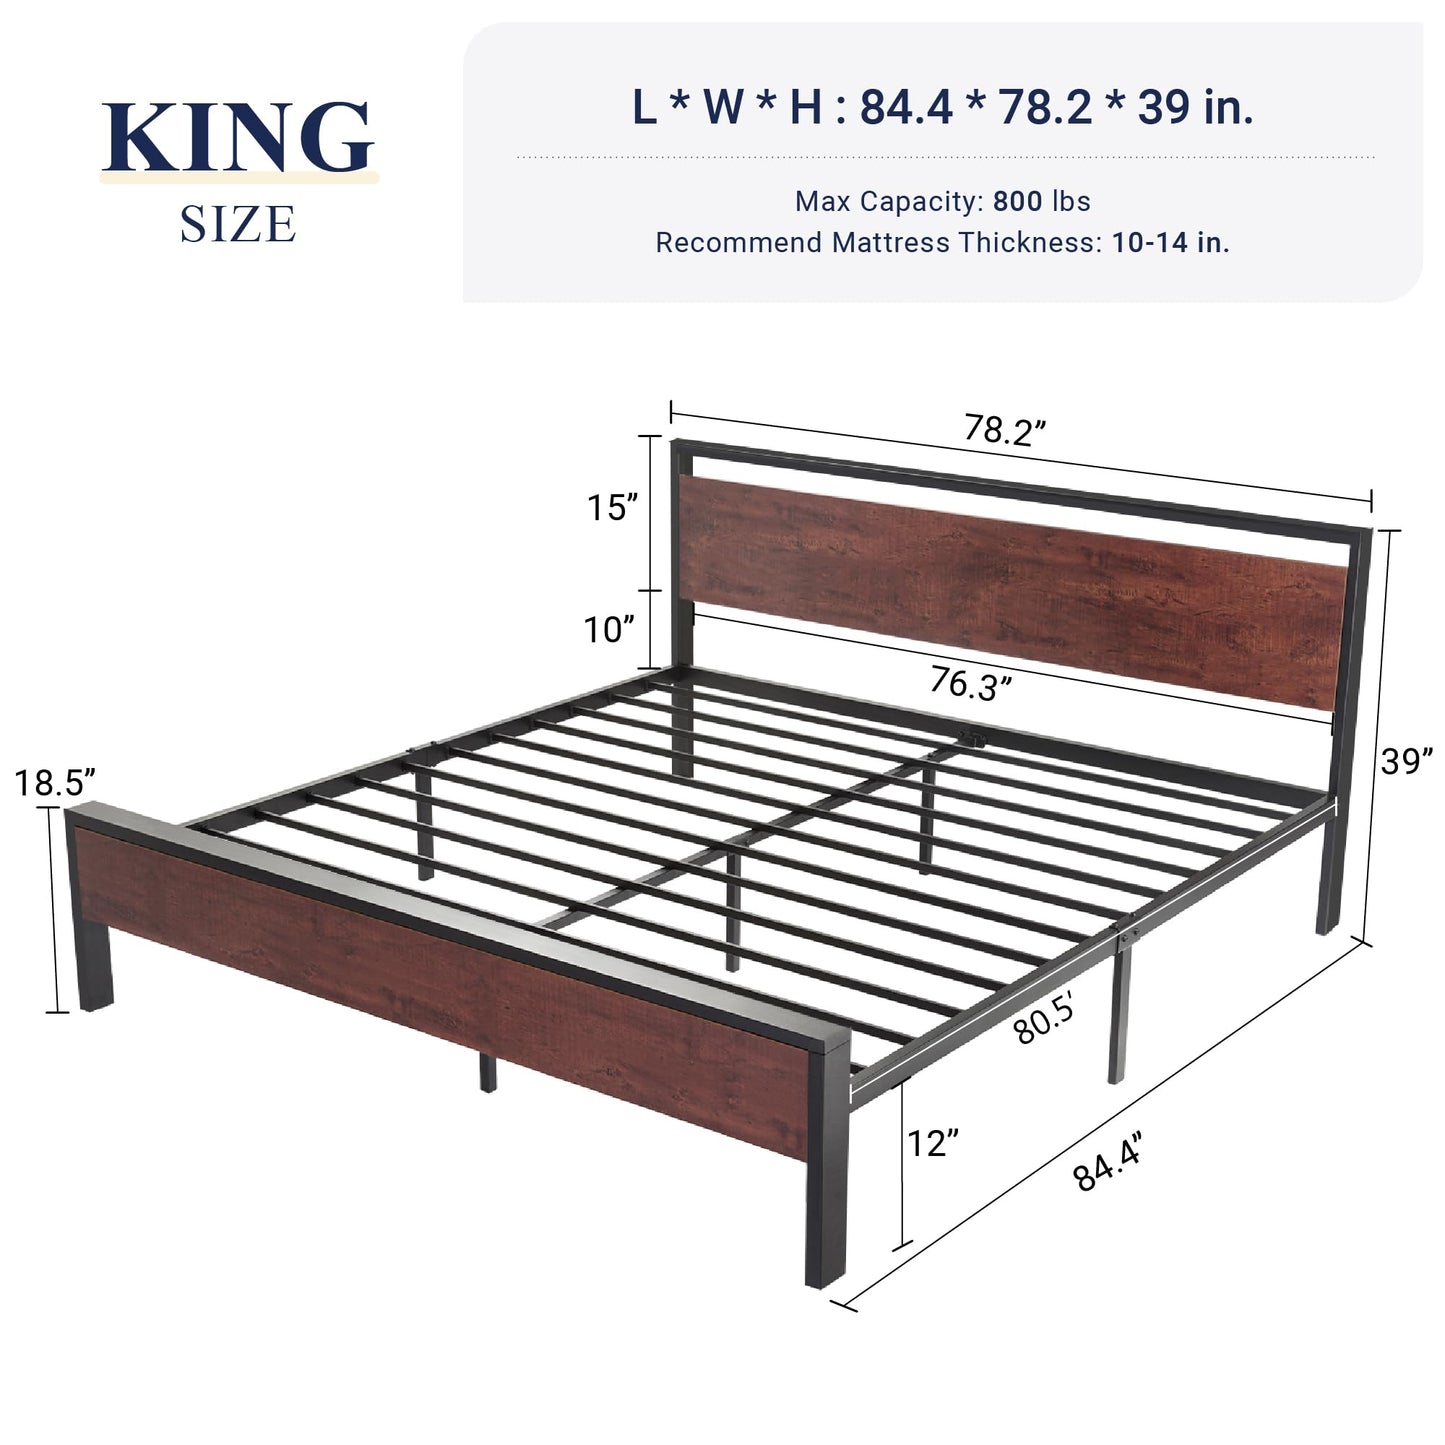 Allewie King Size Platform Bed Frame with Wooden Headboard and Footboard, Heavy Duty 12 Metal Slats Support, No Box Spring Needed, Under Bed Storage,